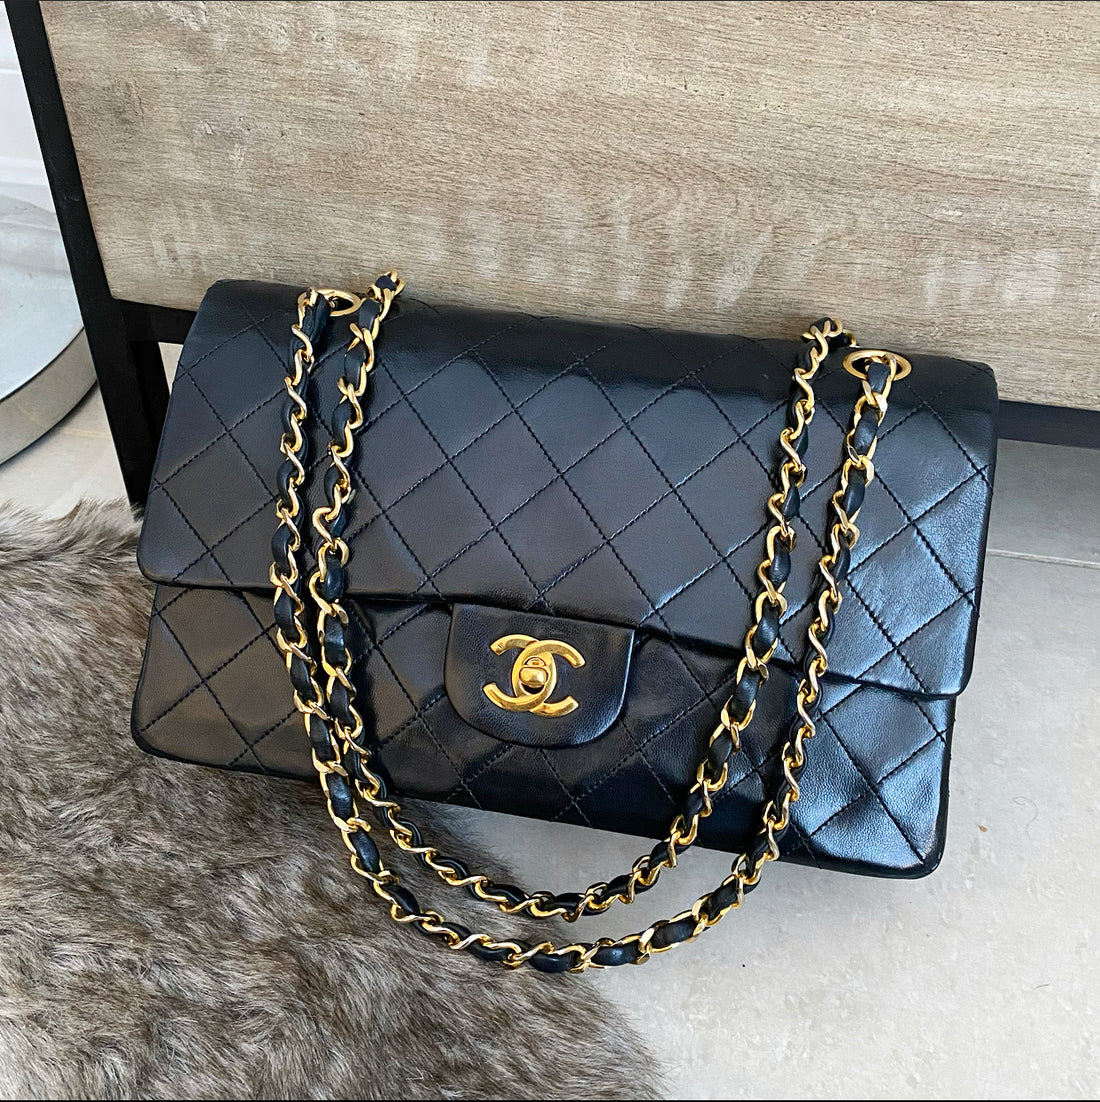 Chanel Vintage Black Quilted Lambskin Leather Double Flap Gold Hardware, 1986-1988, Womens Handbag